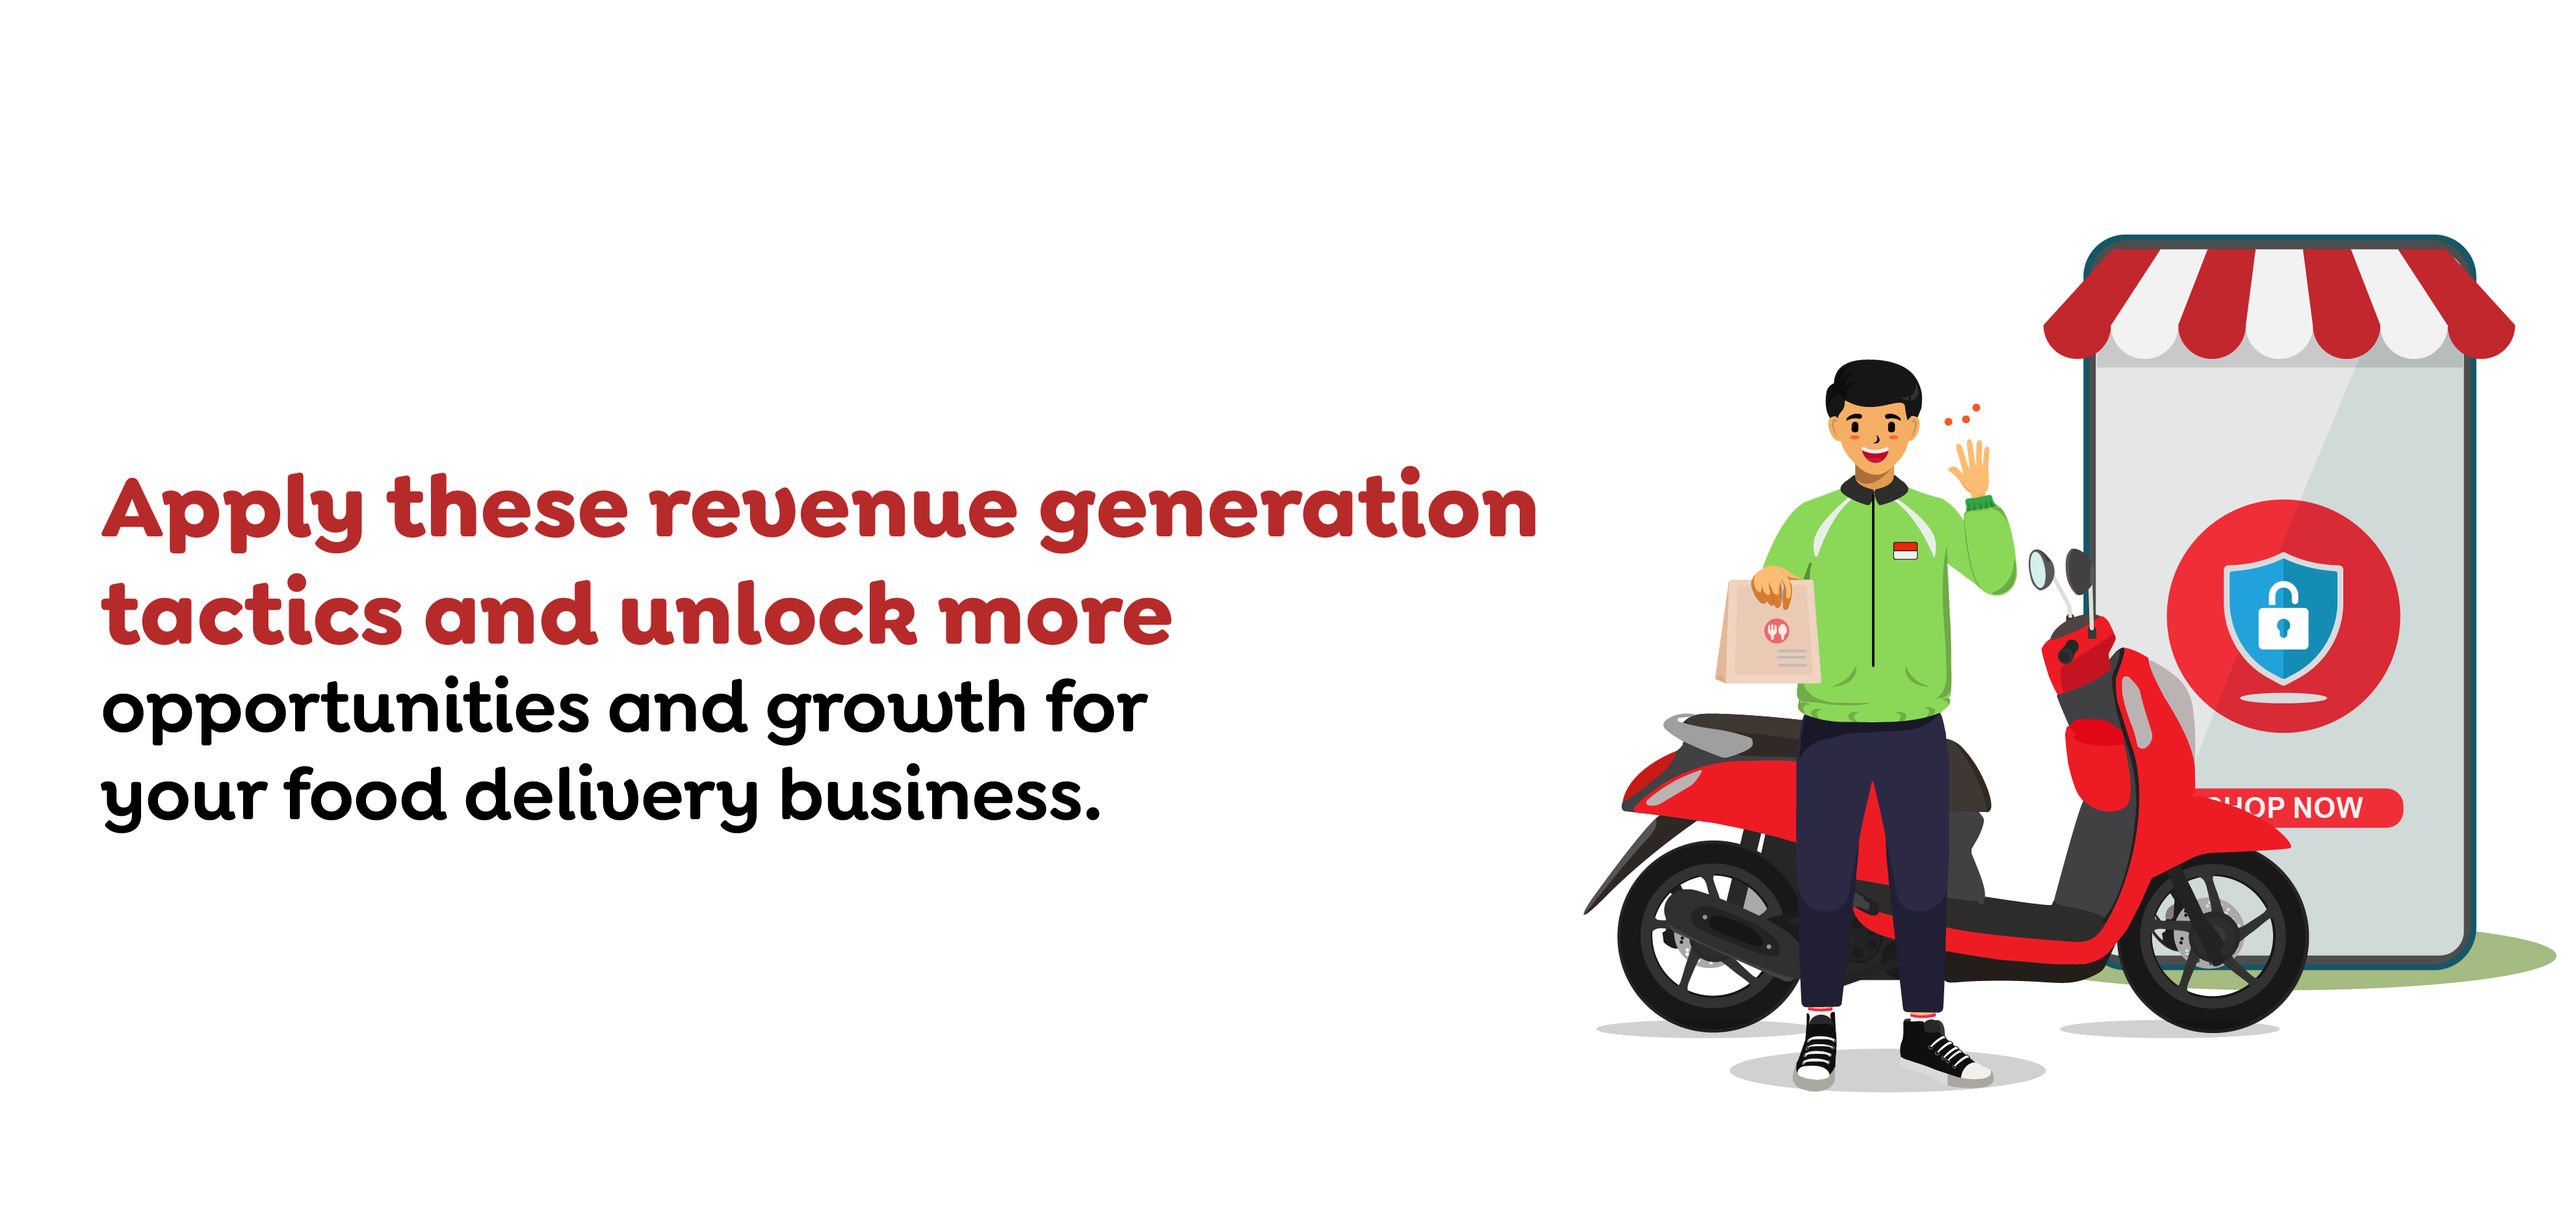 Apply these revenue generation tactics and unlock more opportunities and growth for your food delive